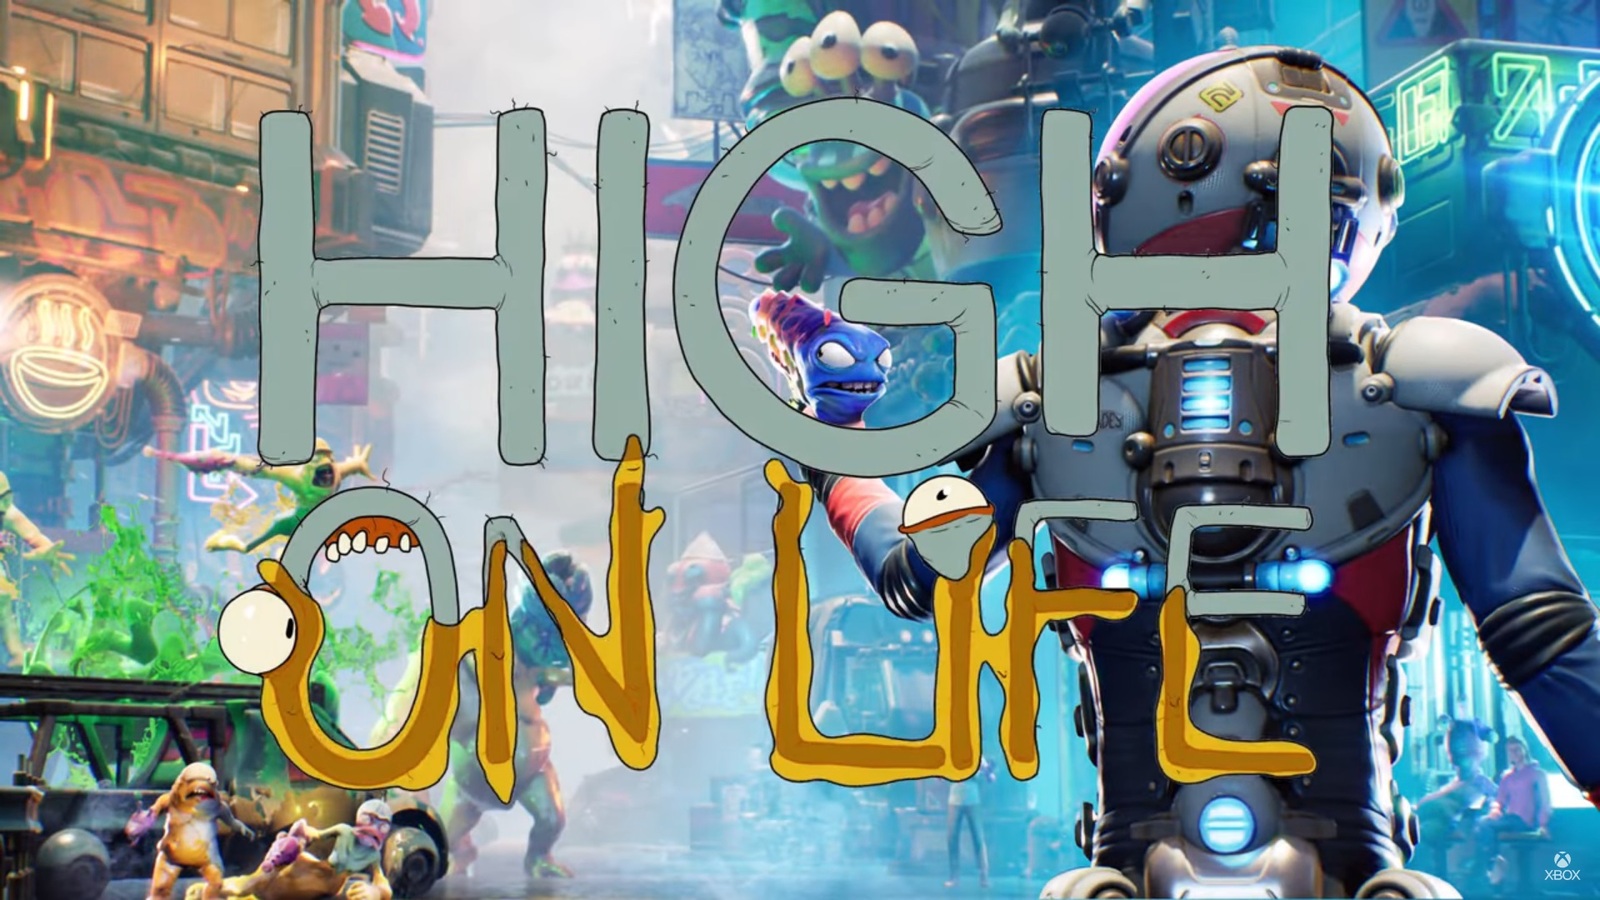 High on Life DLC Is Already Being Planned According to Developers